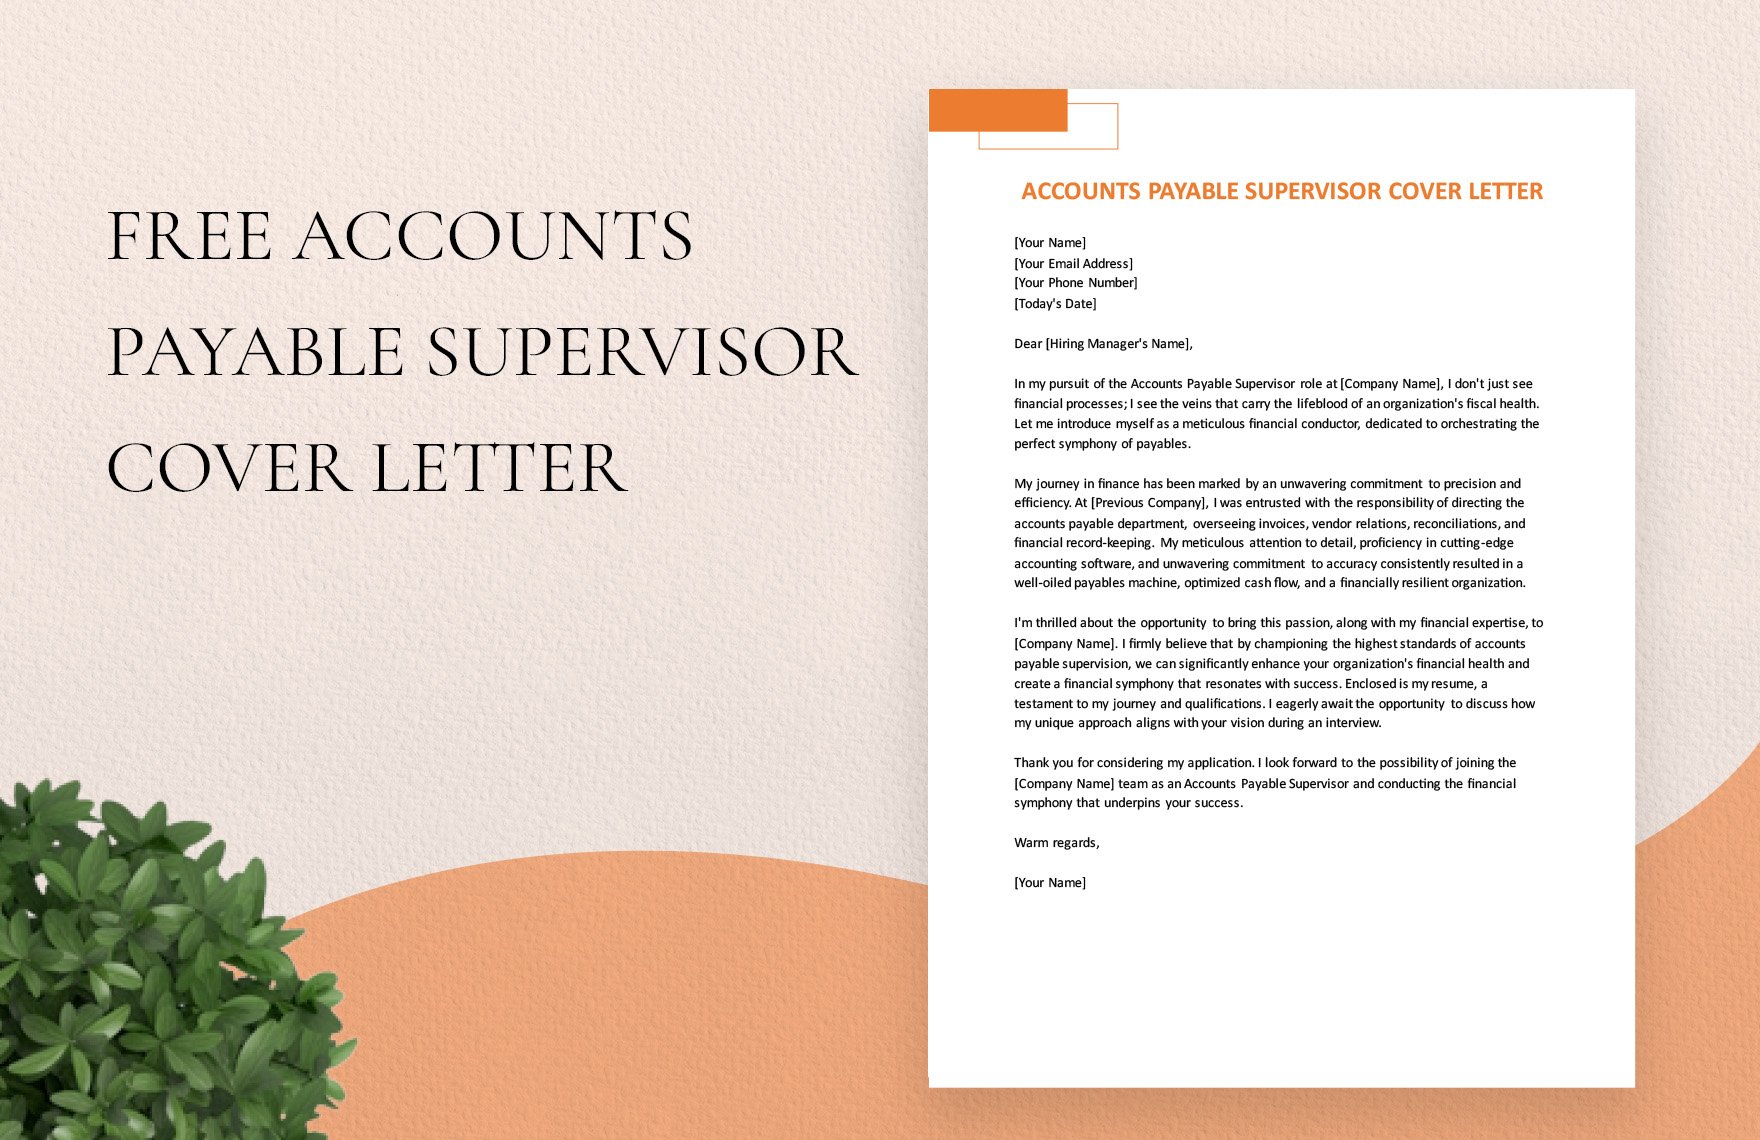 Accounts Payable Supervisor Cover Letter in Word, Google Docs, PDF